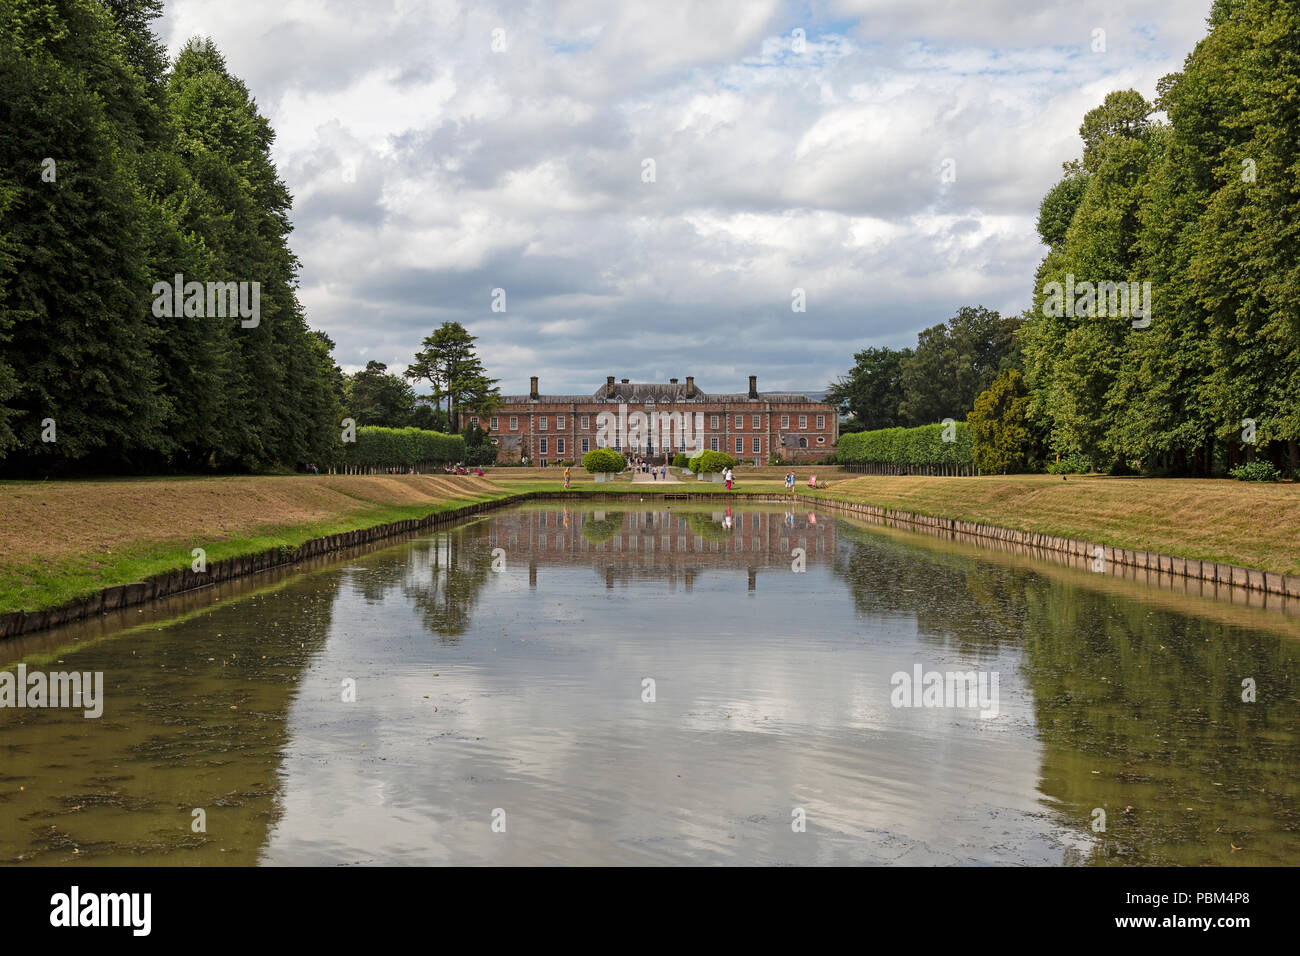 Erddig Hall, near Wrexham in North Wales. Built in the 1680s for Josiah Edisbury, it is a Grade 1 listed property. Stock Photo